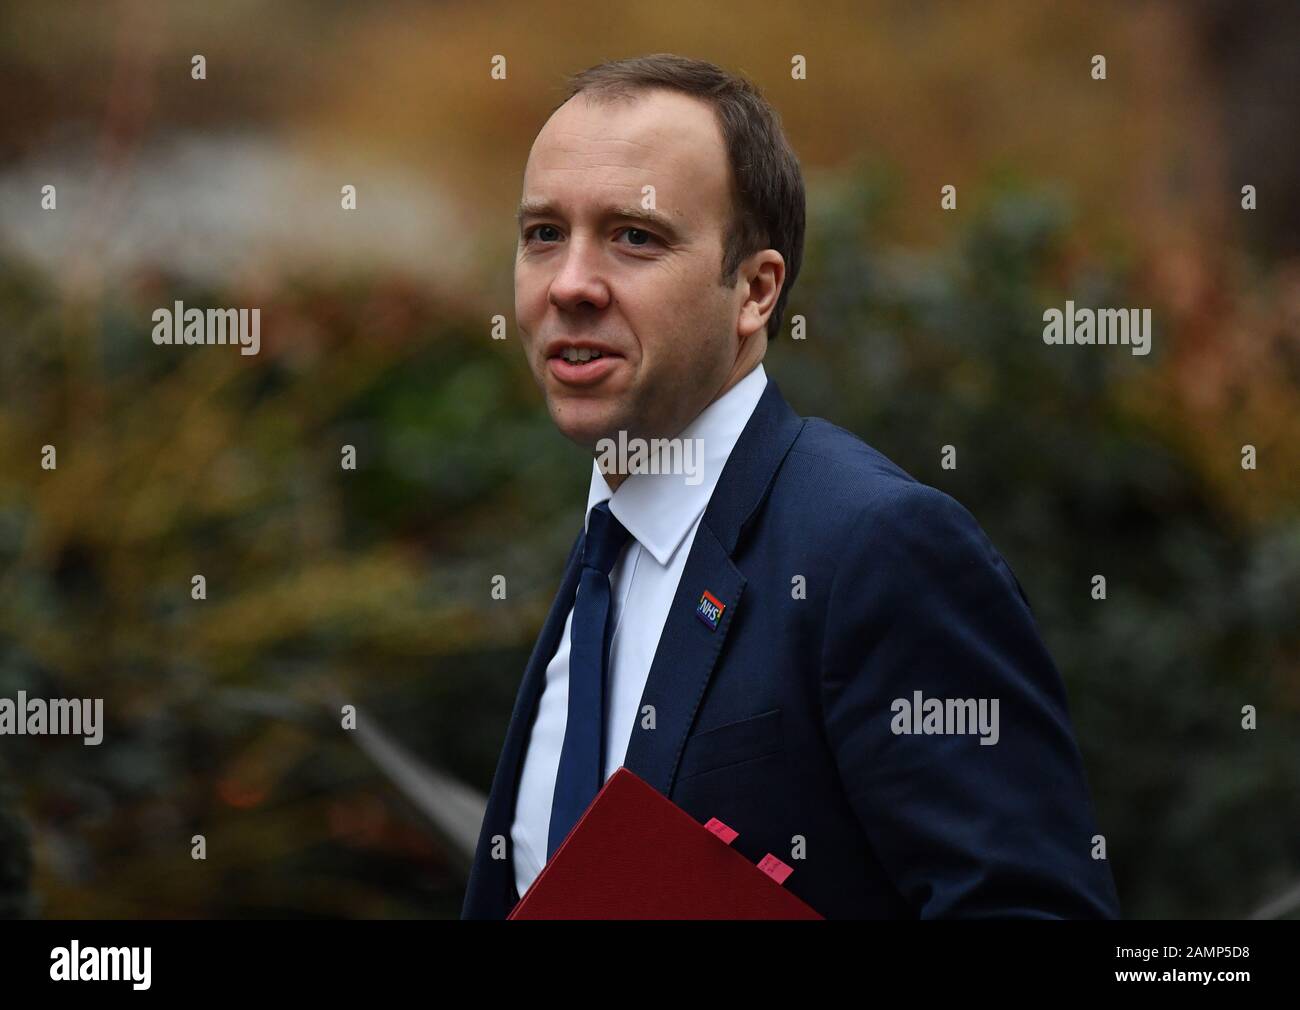 Downing Street, London, UK. 14th January 2020. Matt Hancock, Secretary of State for Health and Social Care in Downing Street for weekly cabinet meeting. Credit: Malcolm Park/Alamy. Stock Photo